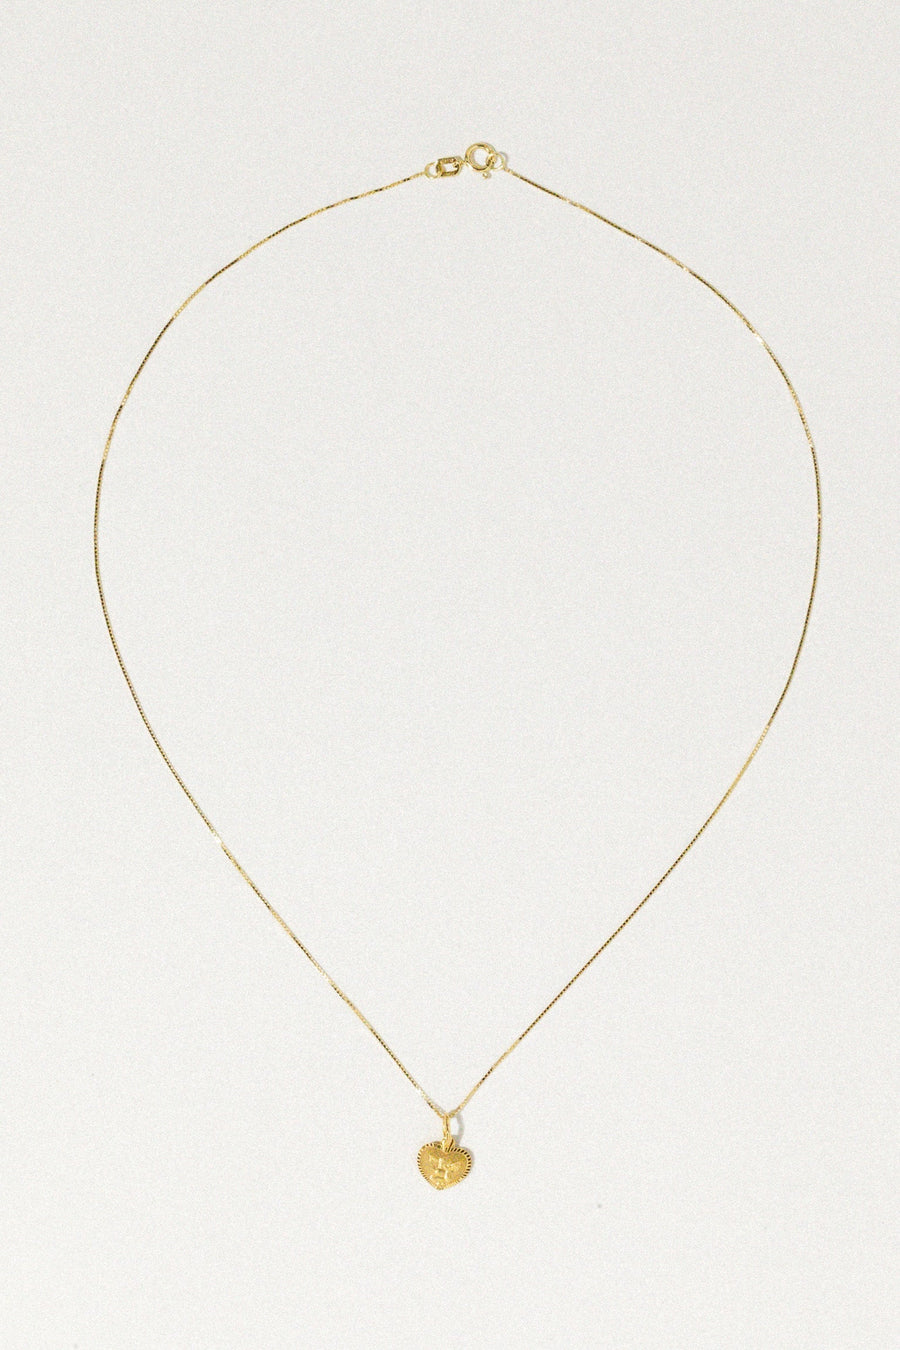 Stuller Jewelry Gold / 16 Inches 14kt Cupid's Heart Necklace